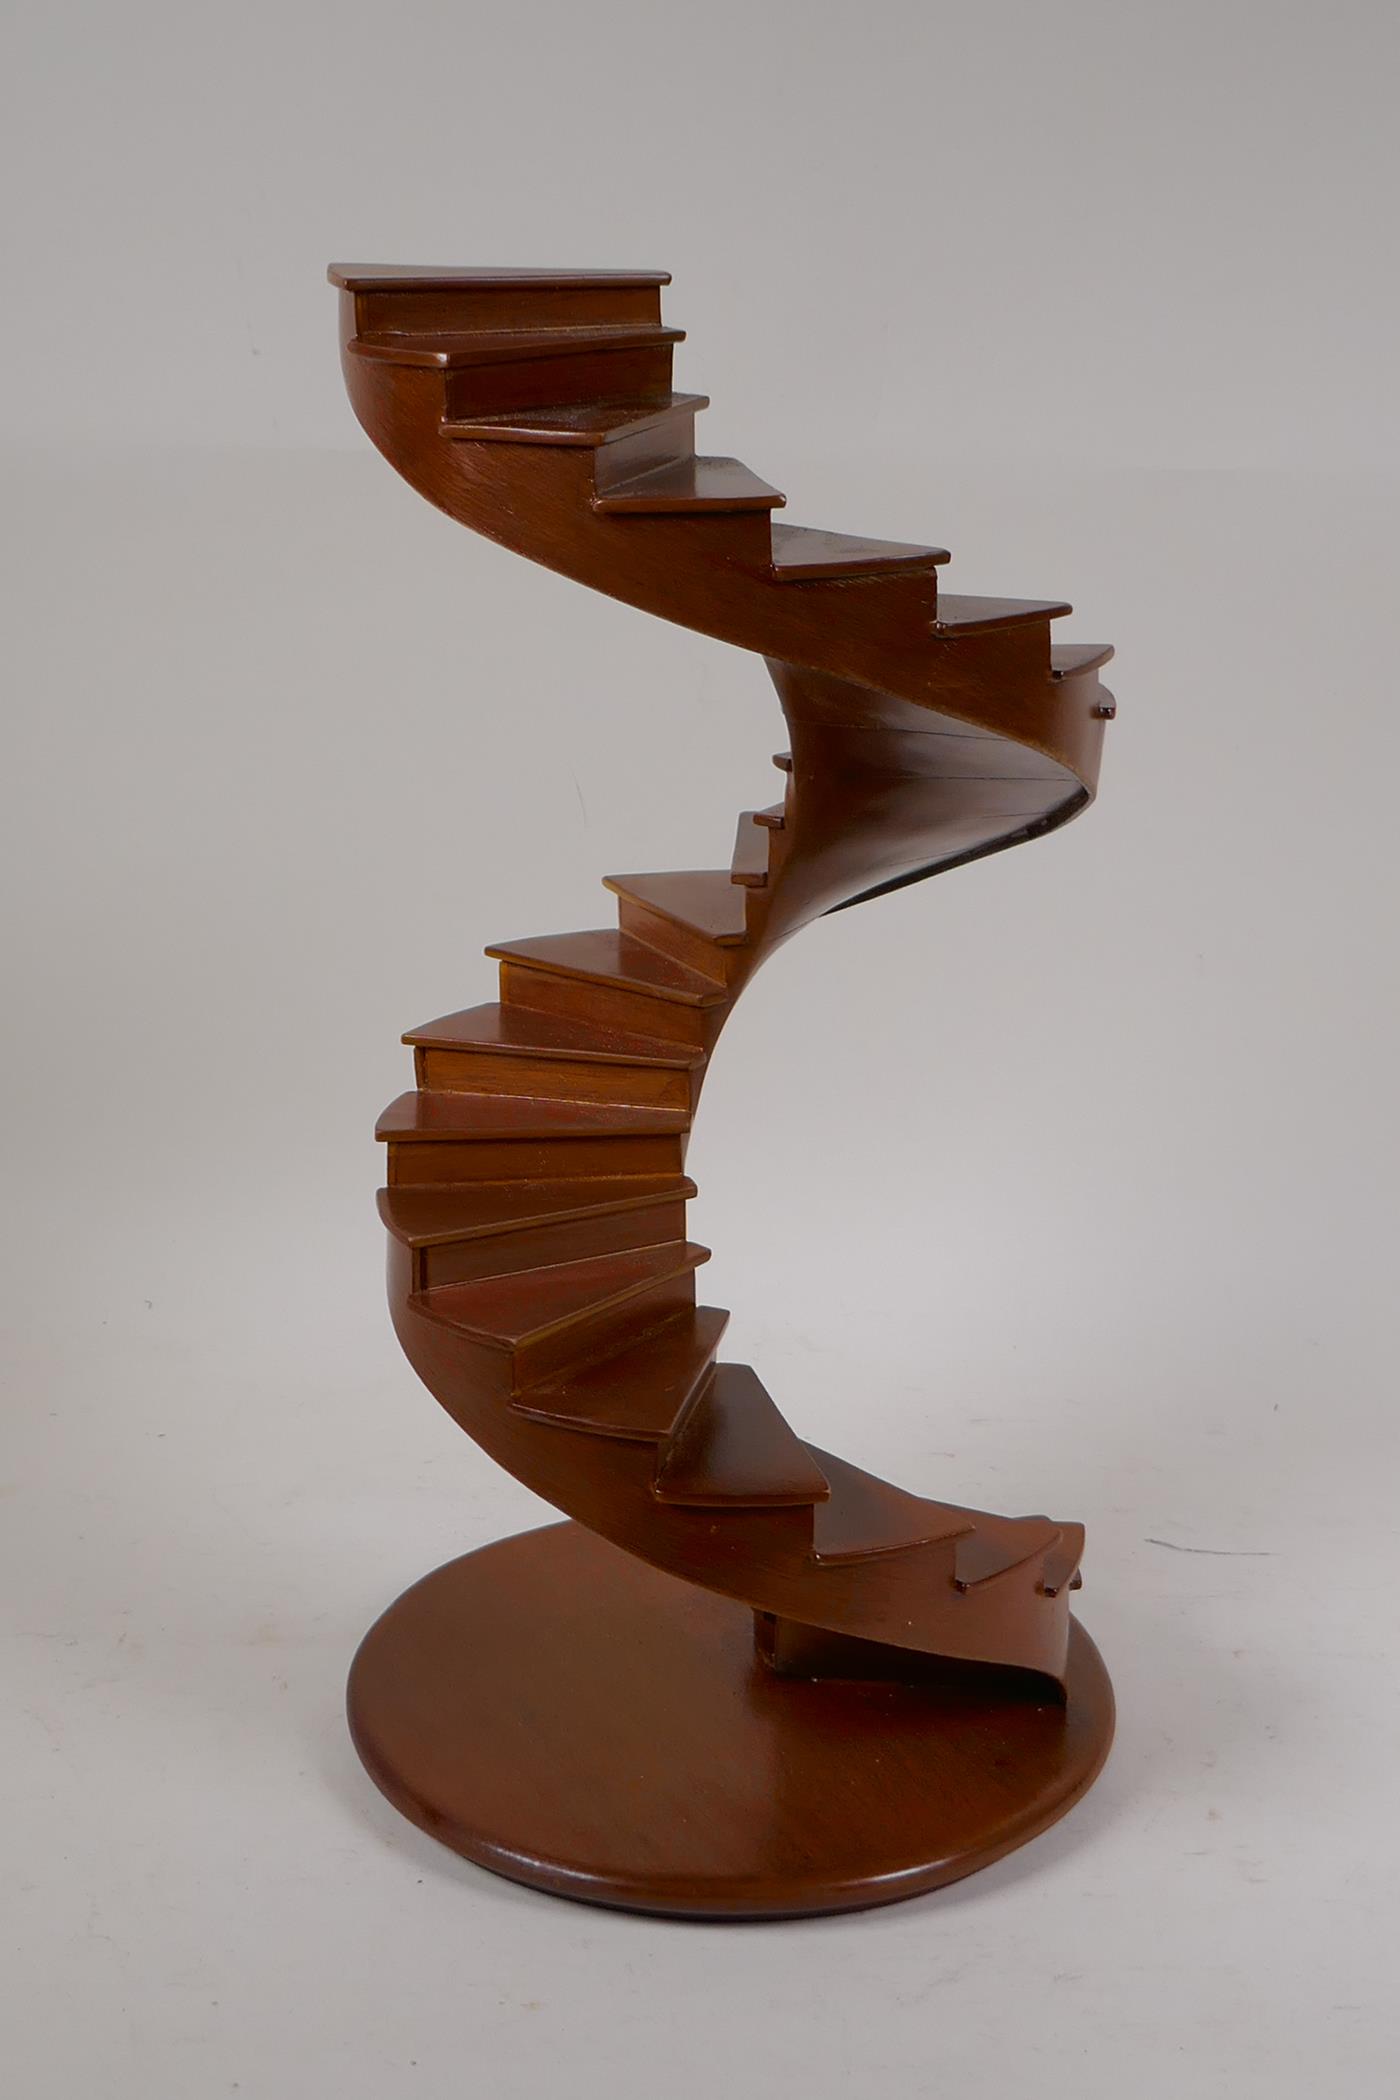 An architectural model of a spiral staircase, 14" high